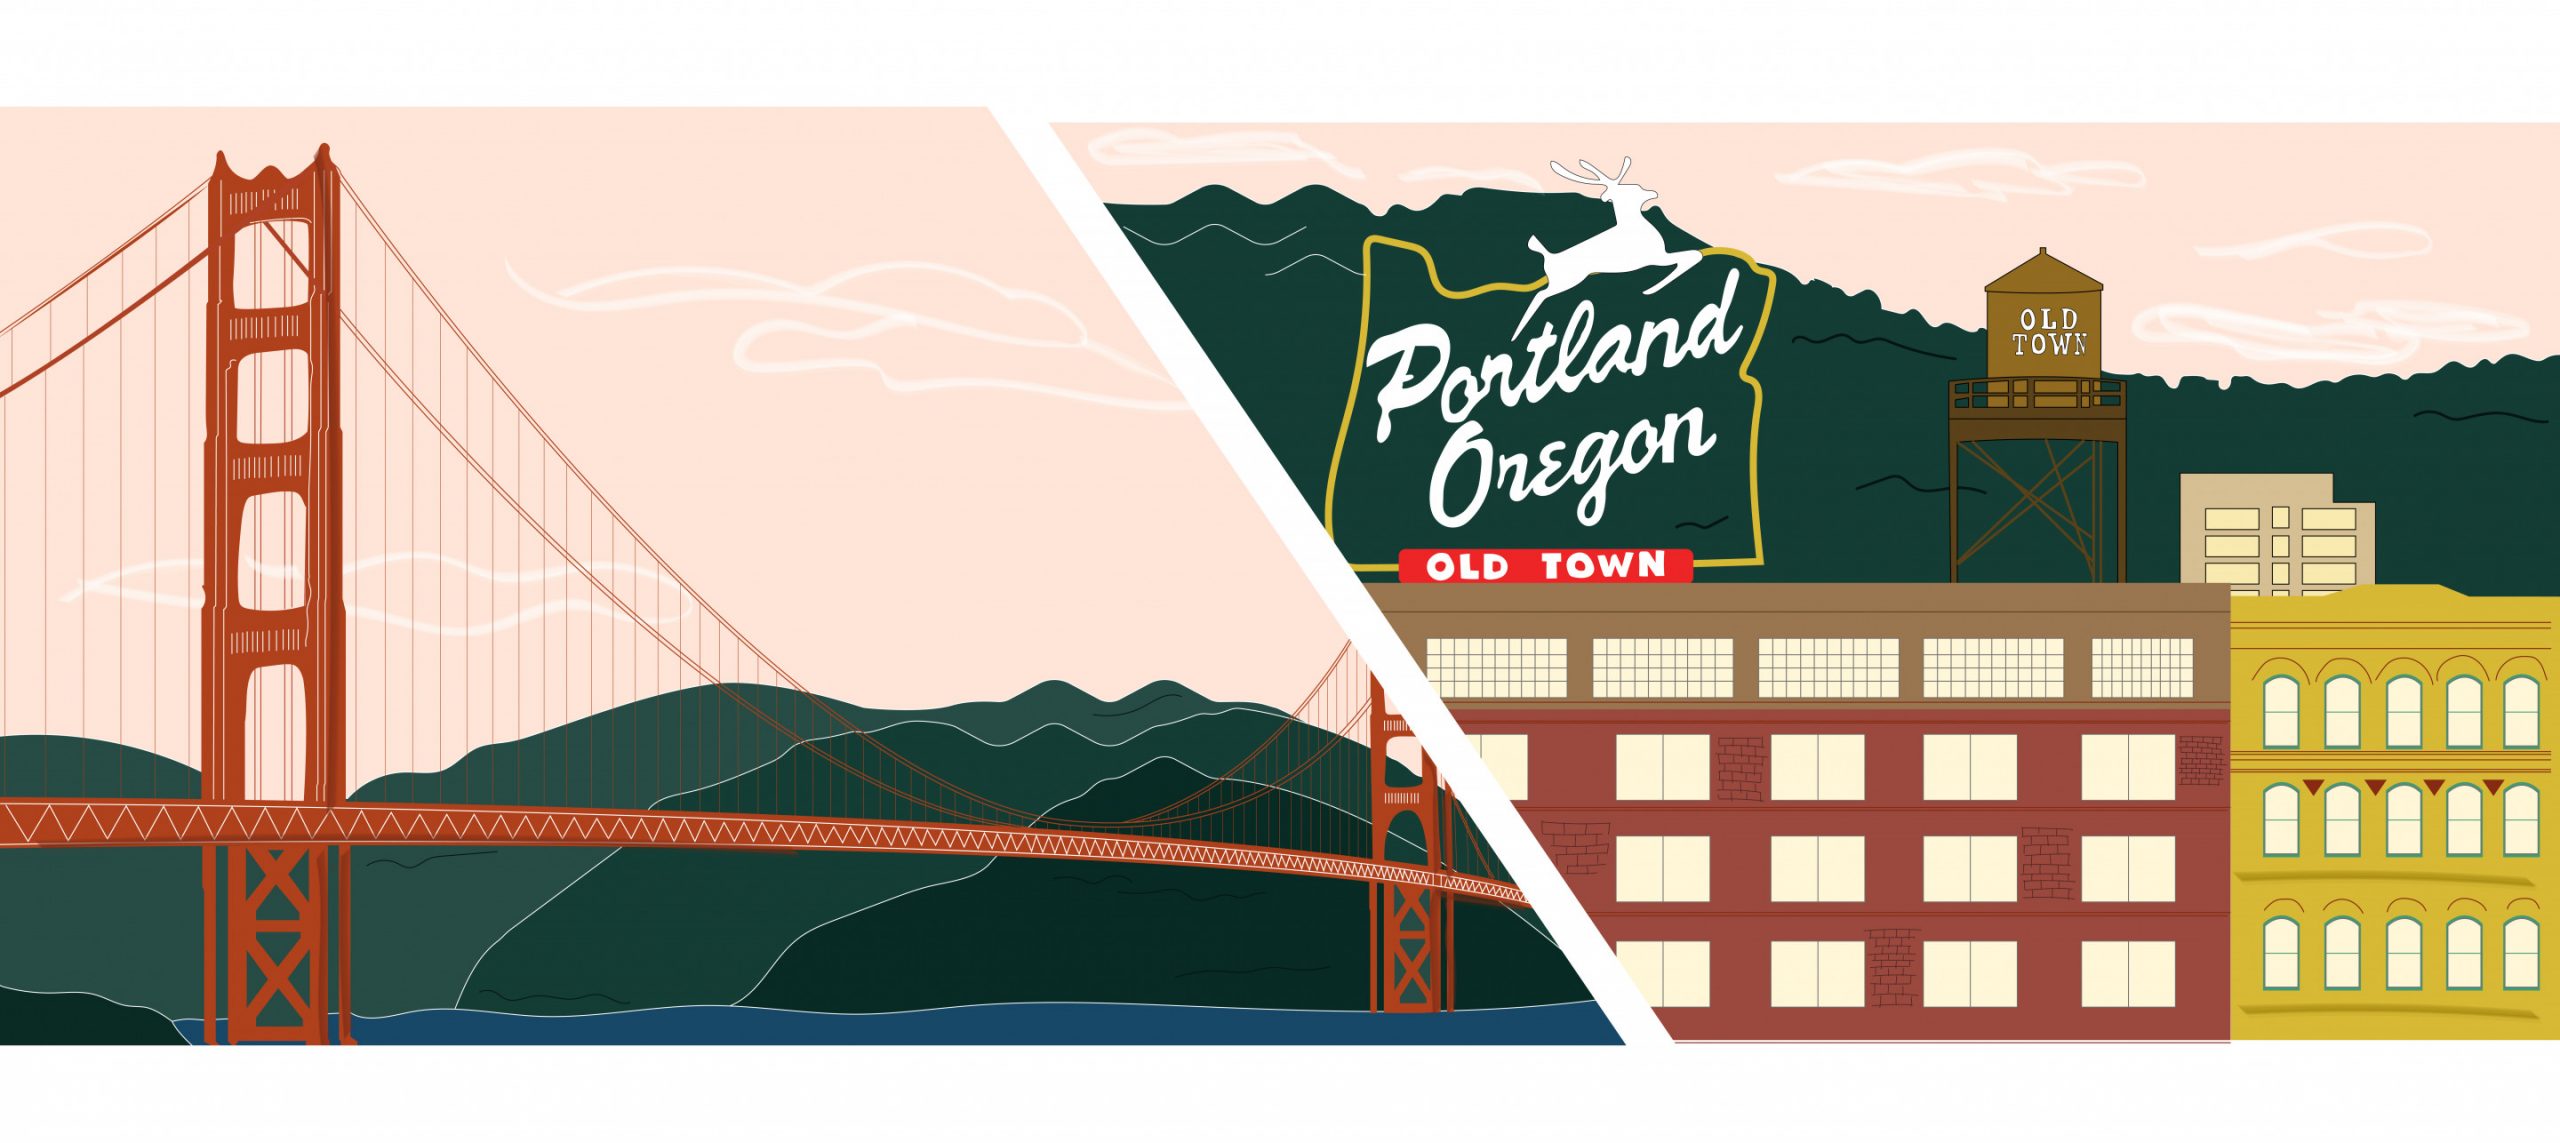 Pink Graphic Of The Portland And San Francisco Skyline